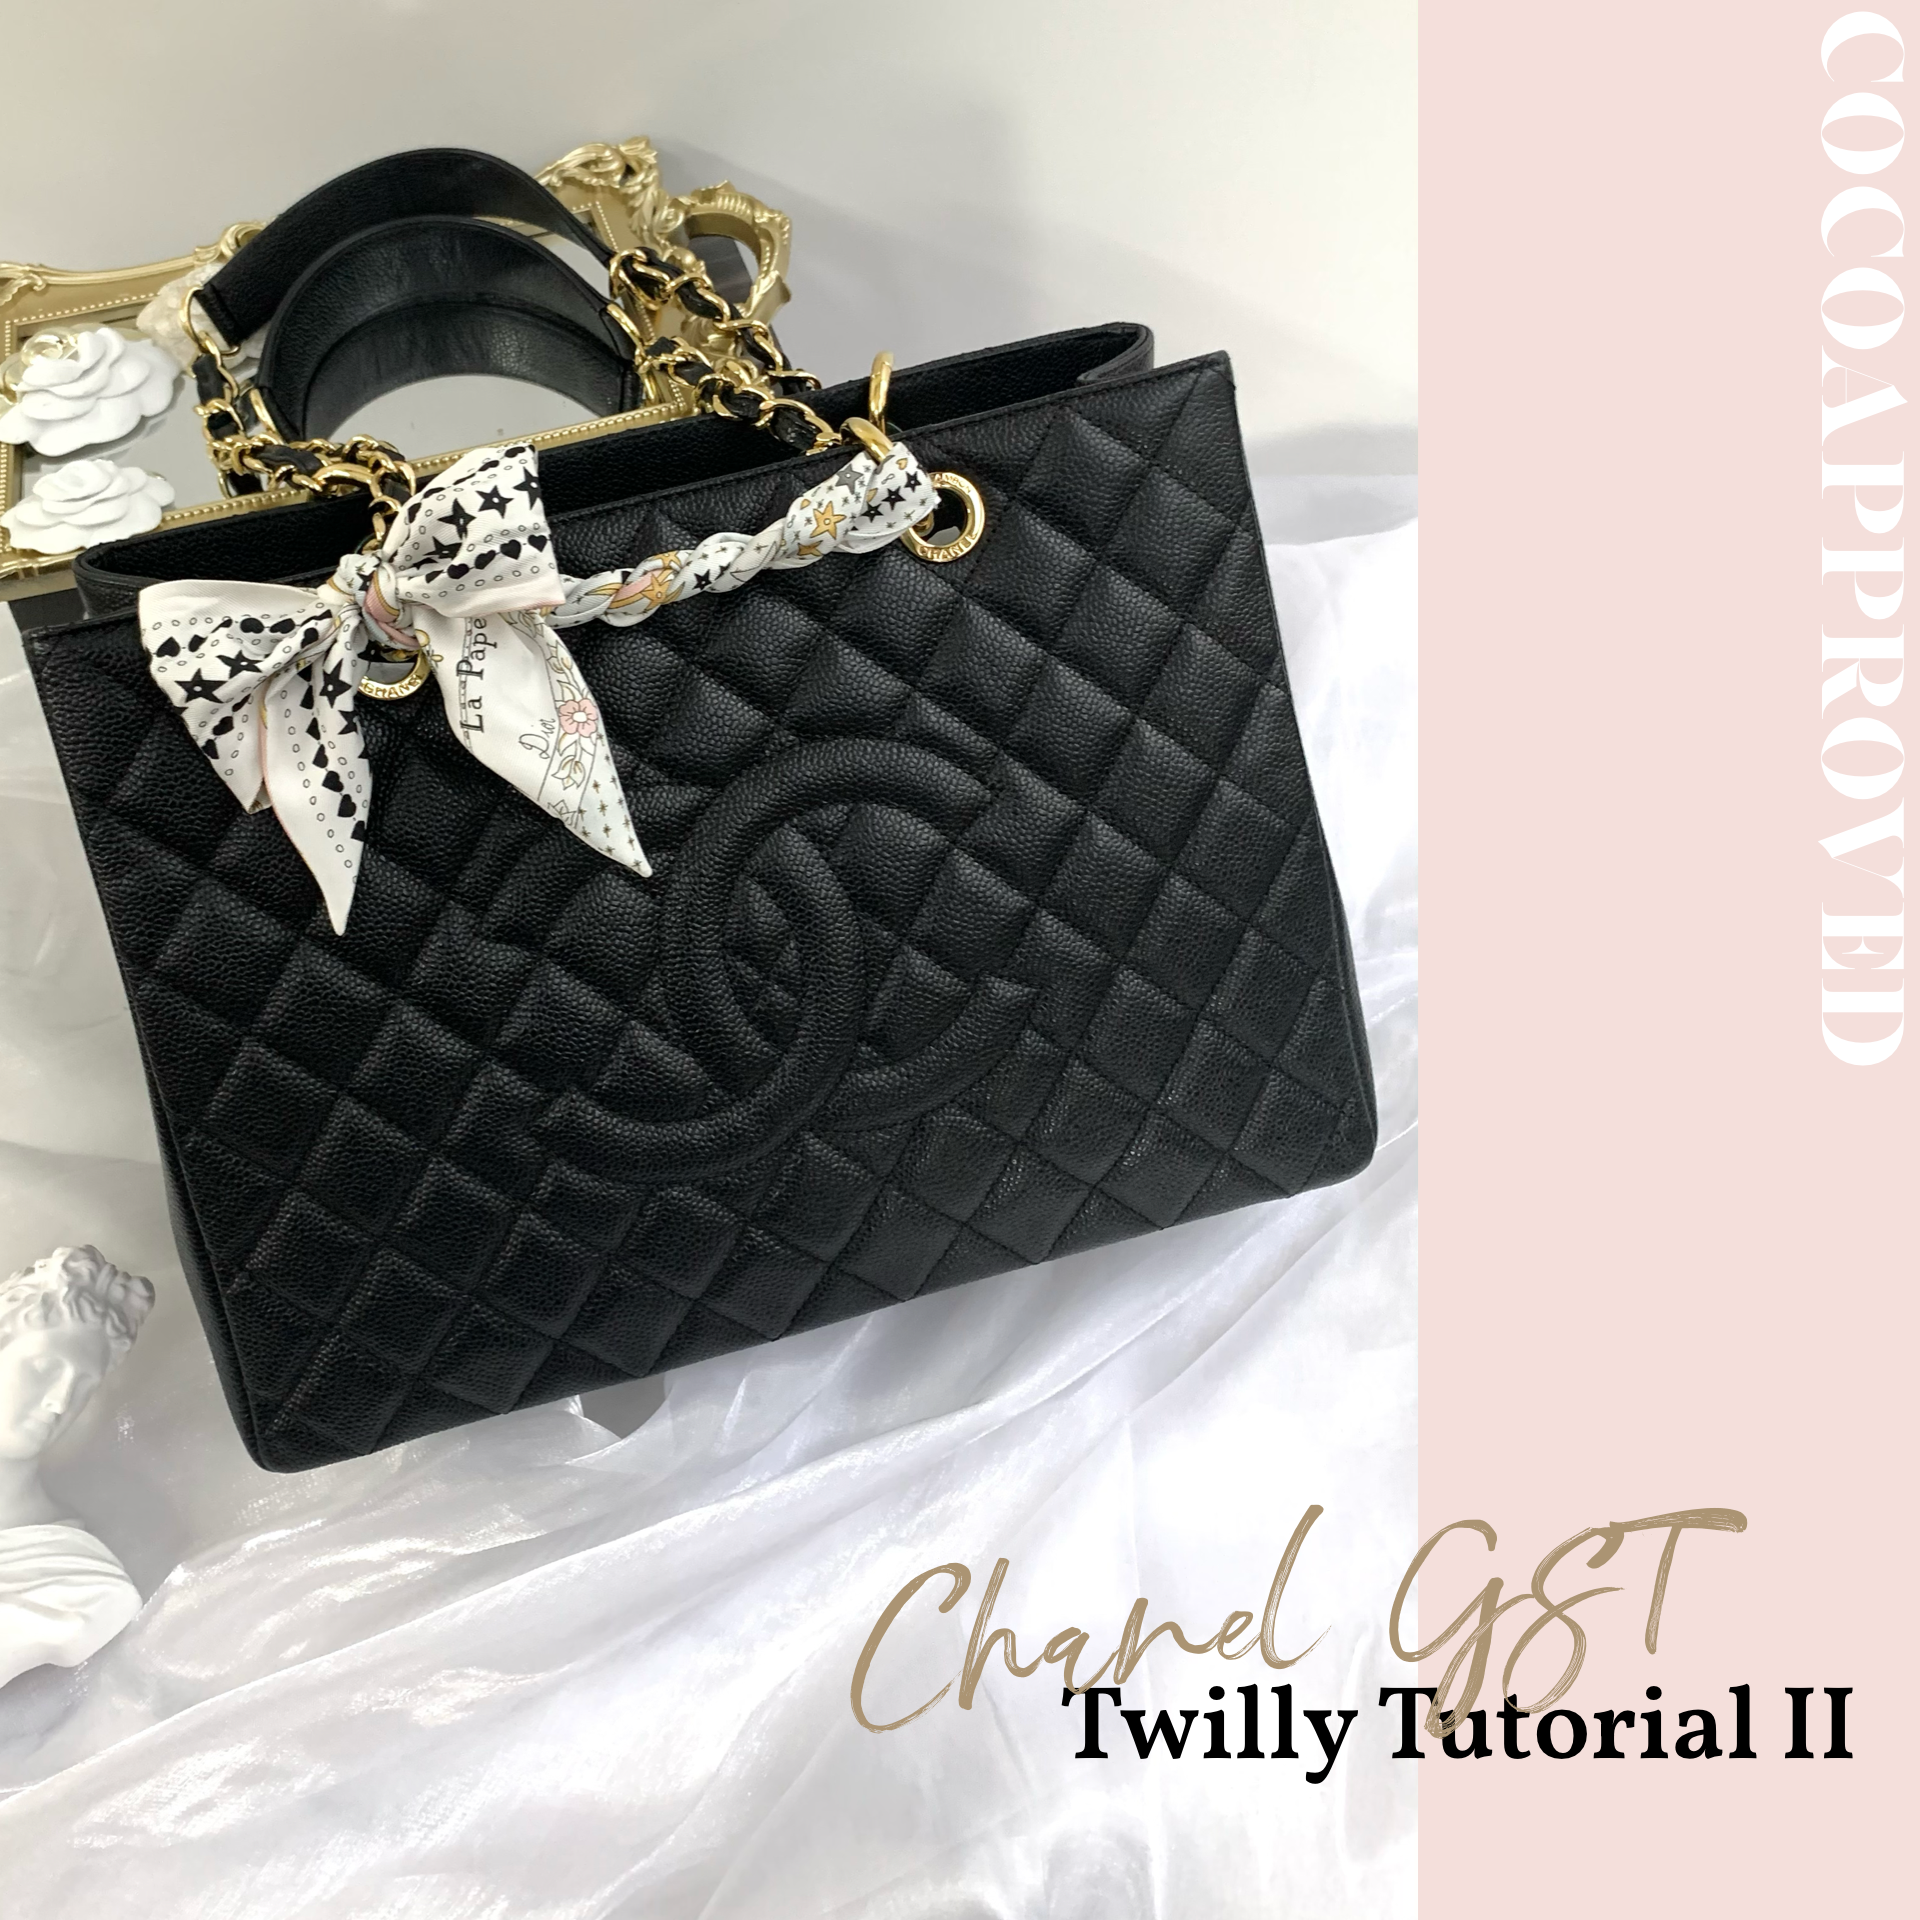 Chanel 21P TWILLY x2 Unboxing Pink and Black on Coco Handle Bags  #luxurypl38 